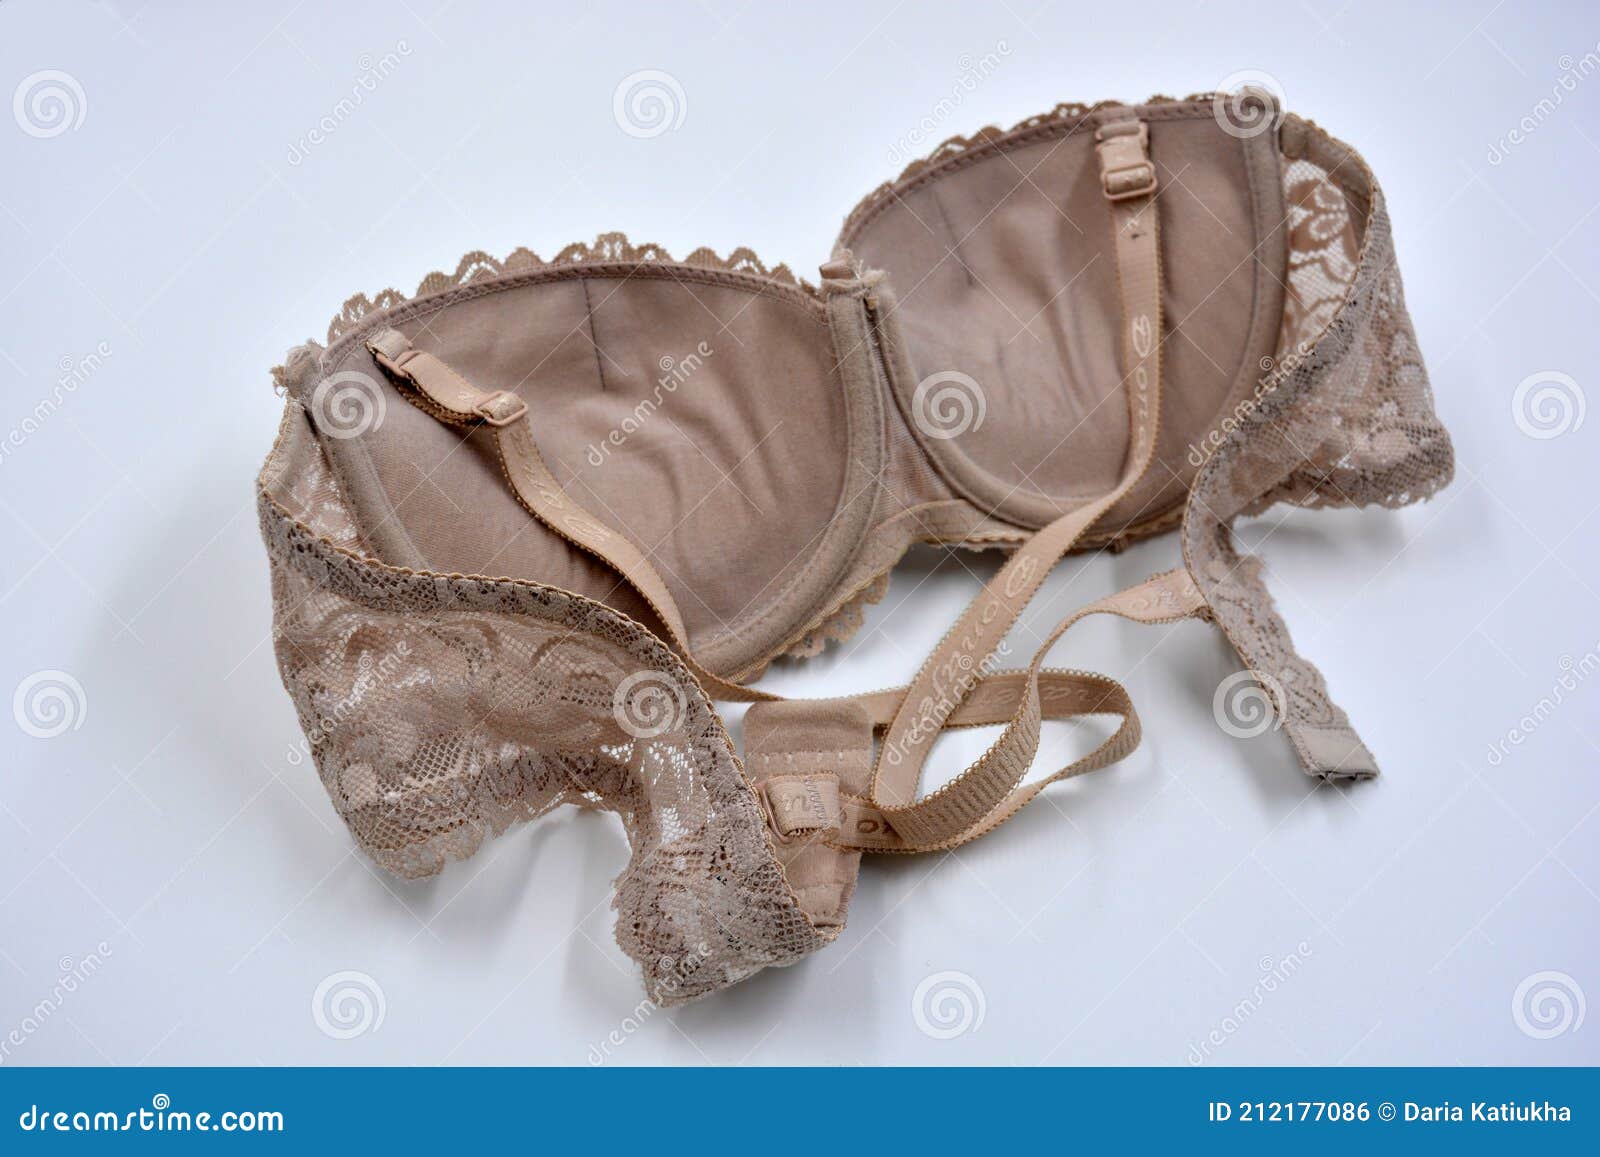 Handsome Brown, Bodily Female Bra with Pitpus, Lingerie Located on White  Background. Stock Photo - Image of accessory, dark: 212177086